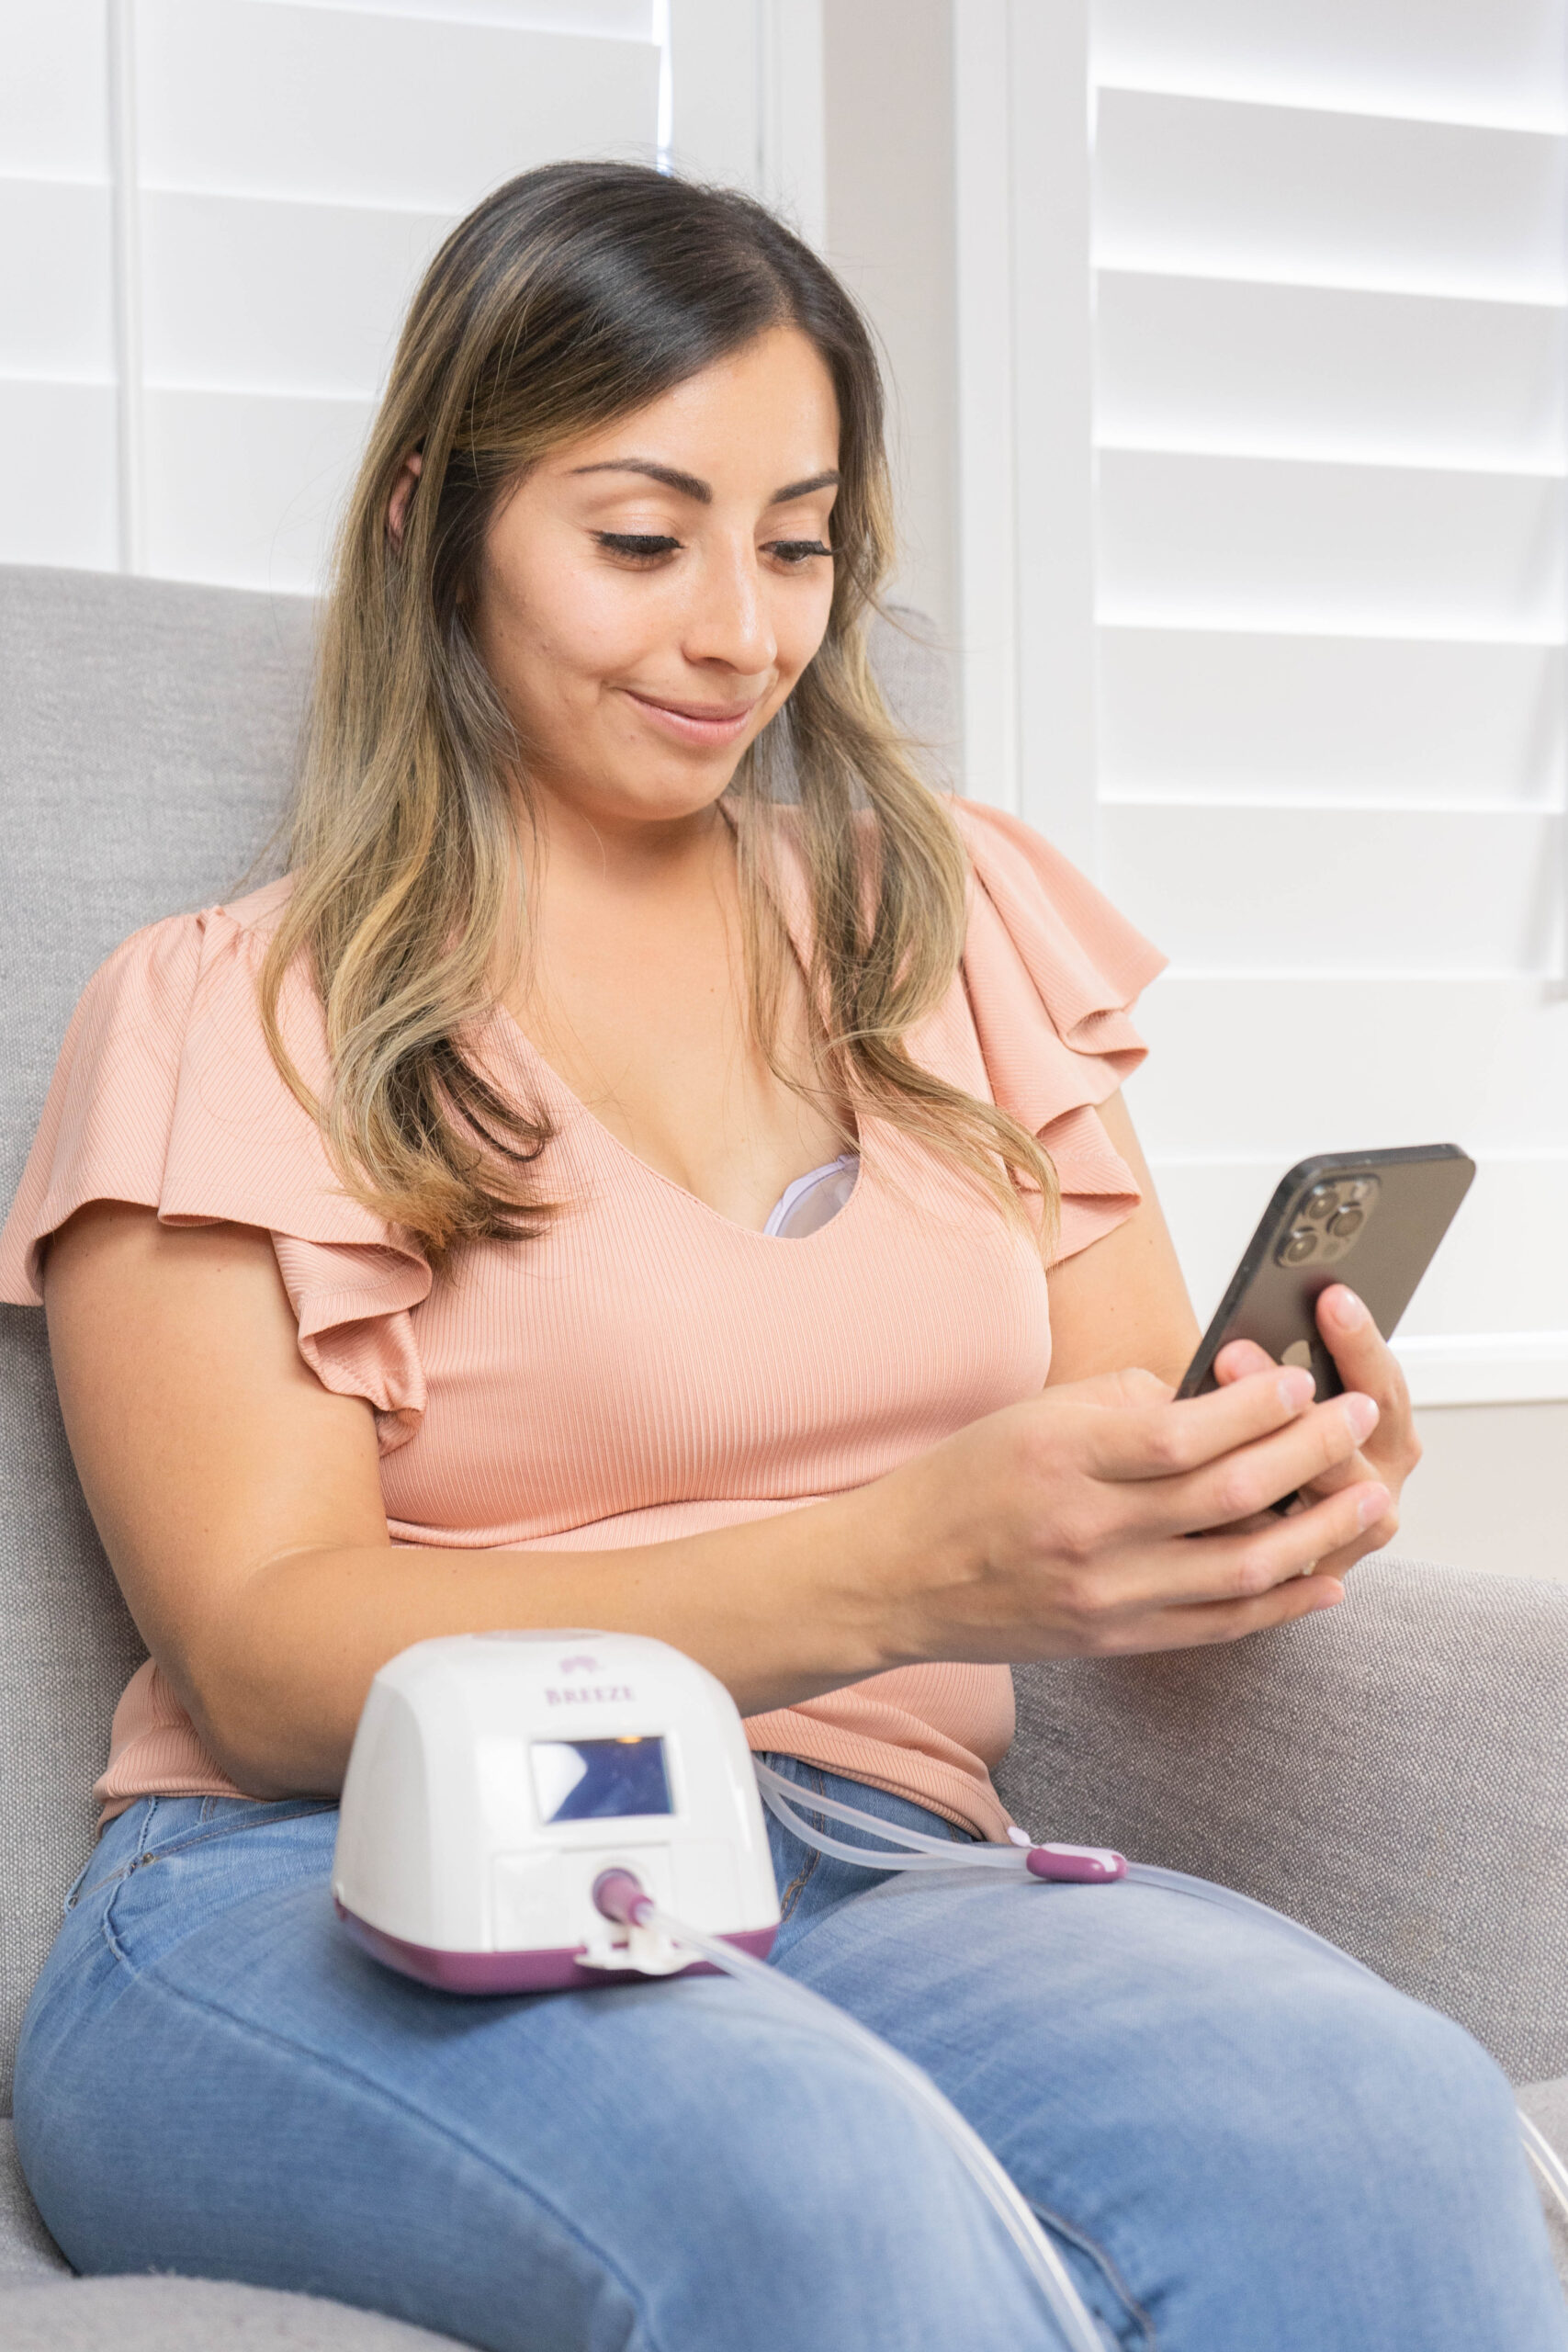 Woman on her phone getting breast pumping support.